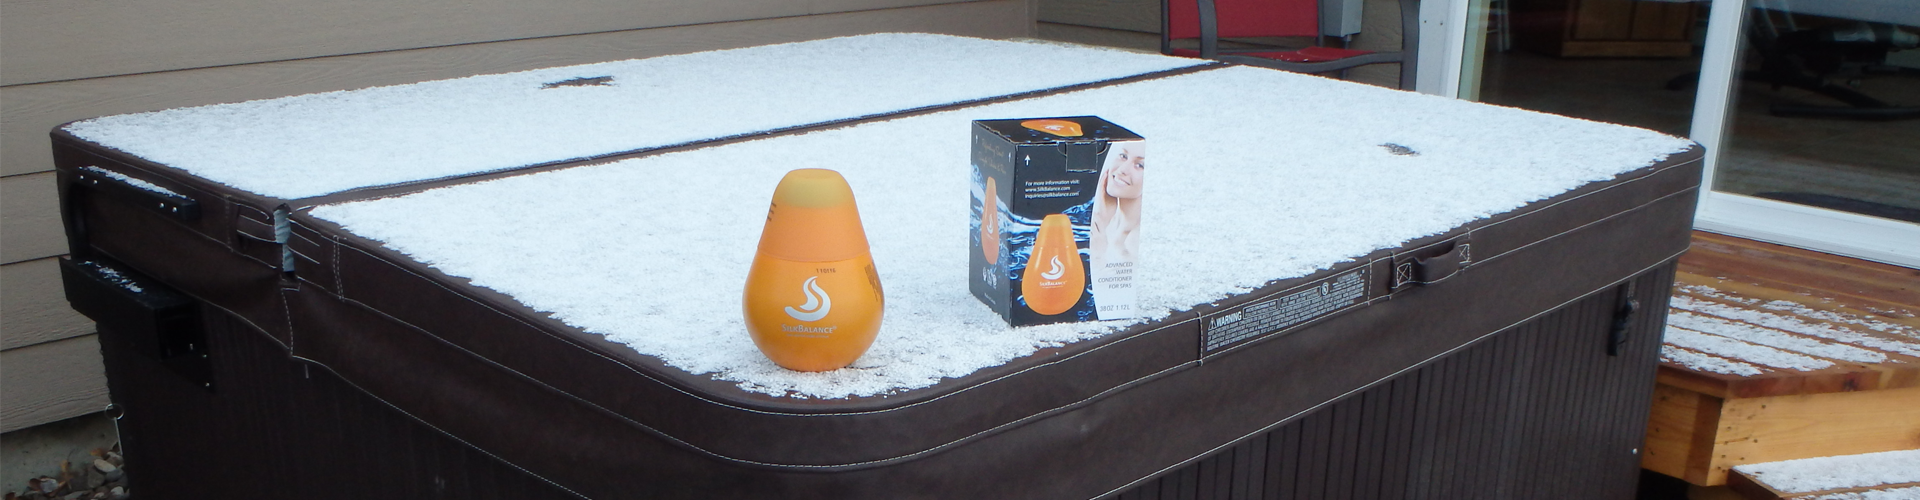 How to Winterize Your Hot Tub – If You Want To